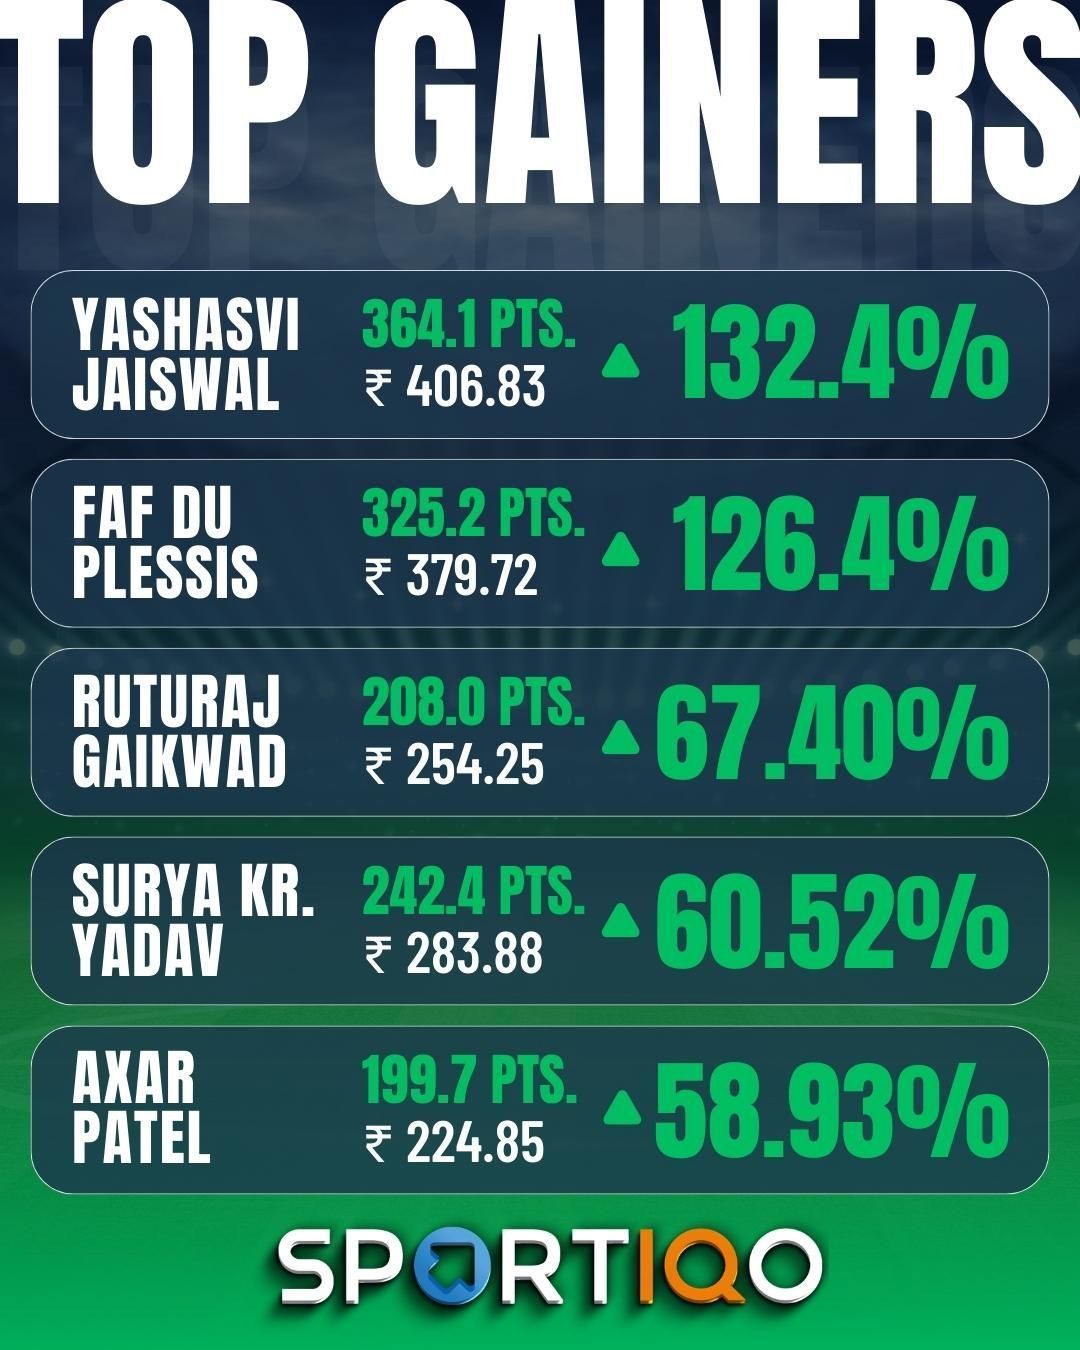 Yashasvi Jaiswal and Faf du Plessis are among the top gainers for the week.